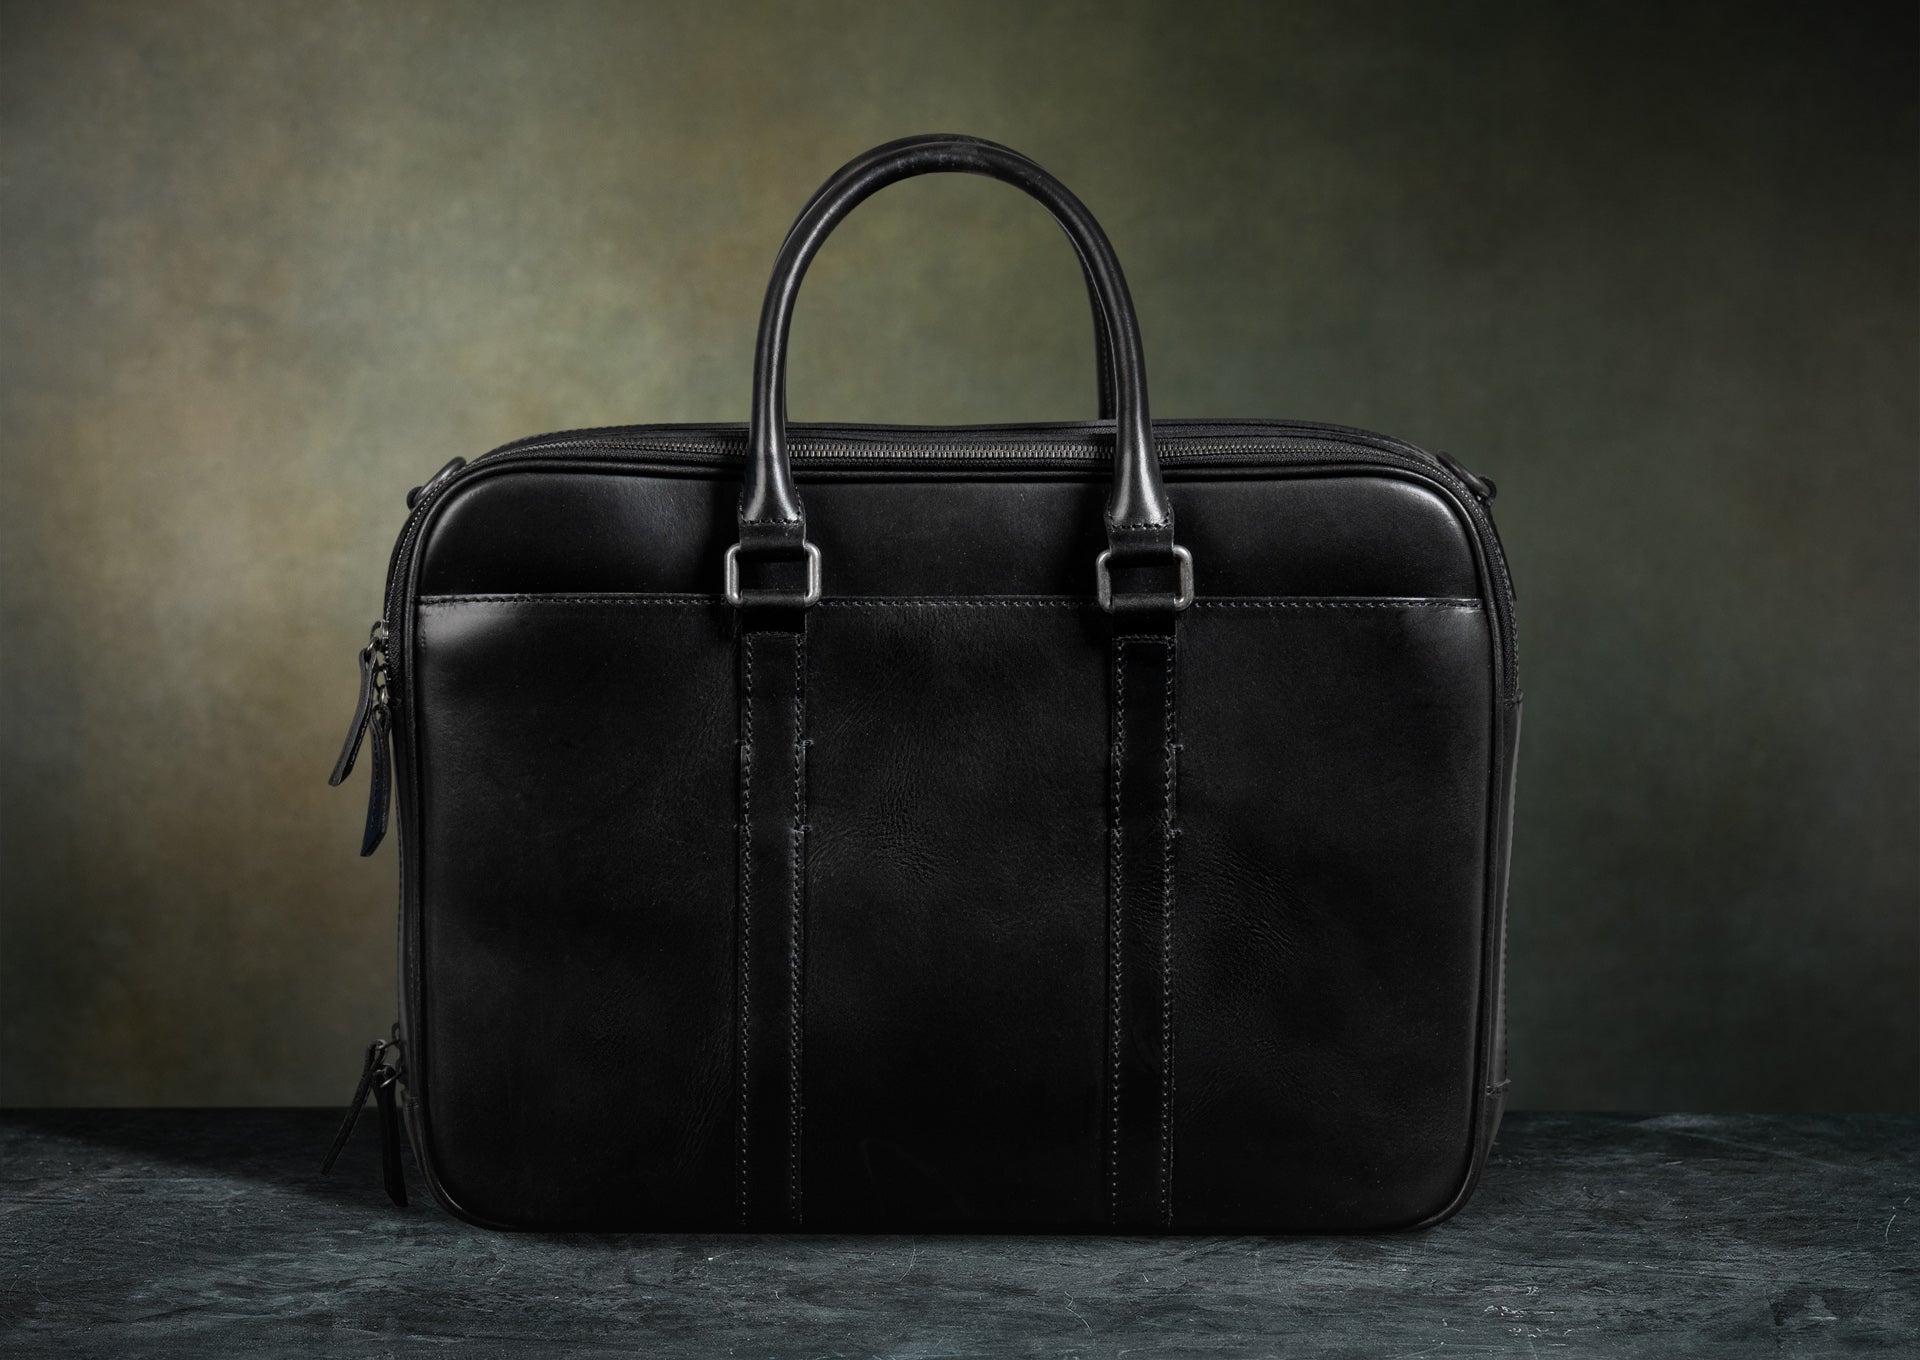 Executives Large Single Compartment Leather Briefcase 